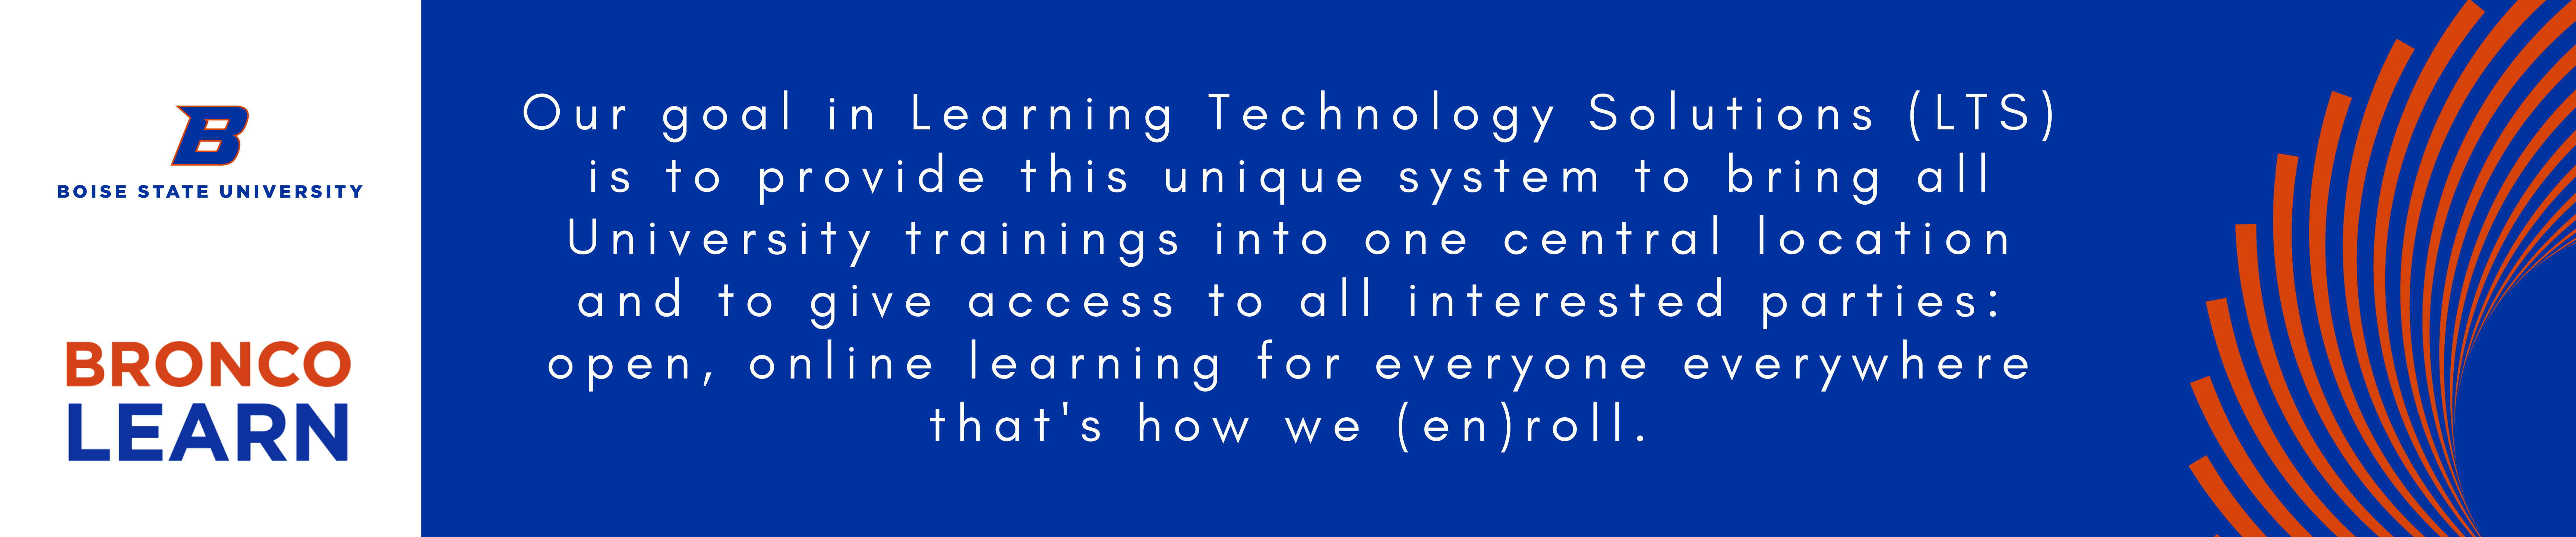 Our goal in Learning Technology Solutions (LTS) is to provide this unique system to bring all University trainings into one central location and to give access to all interested parties, open, online learning for everyone everywhere that's how we enroll